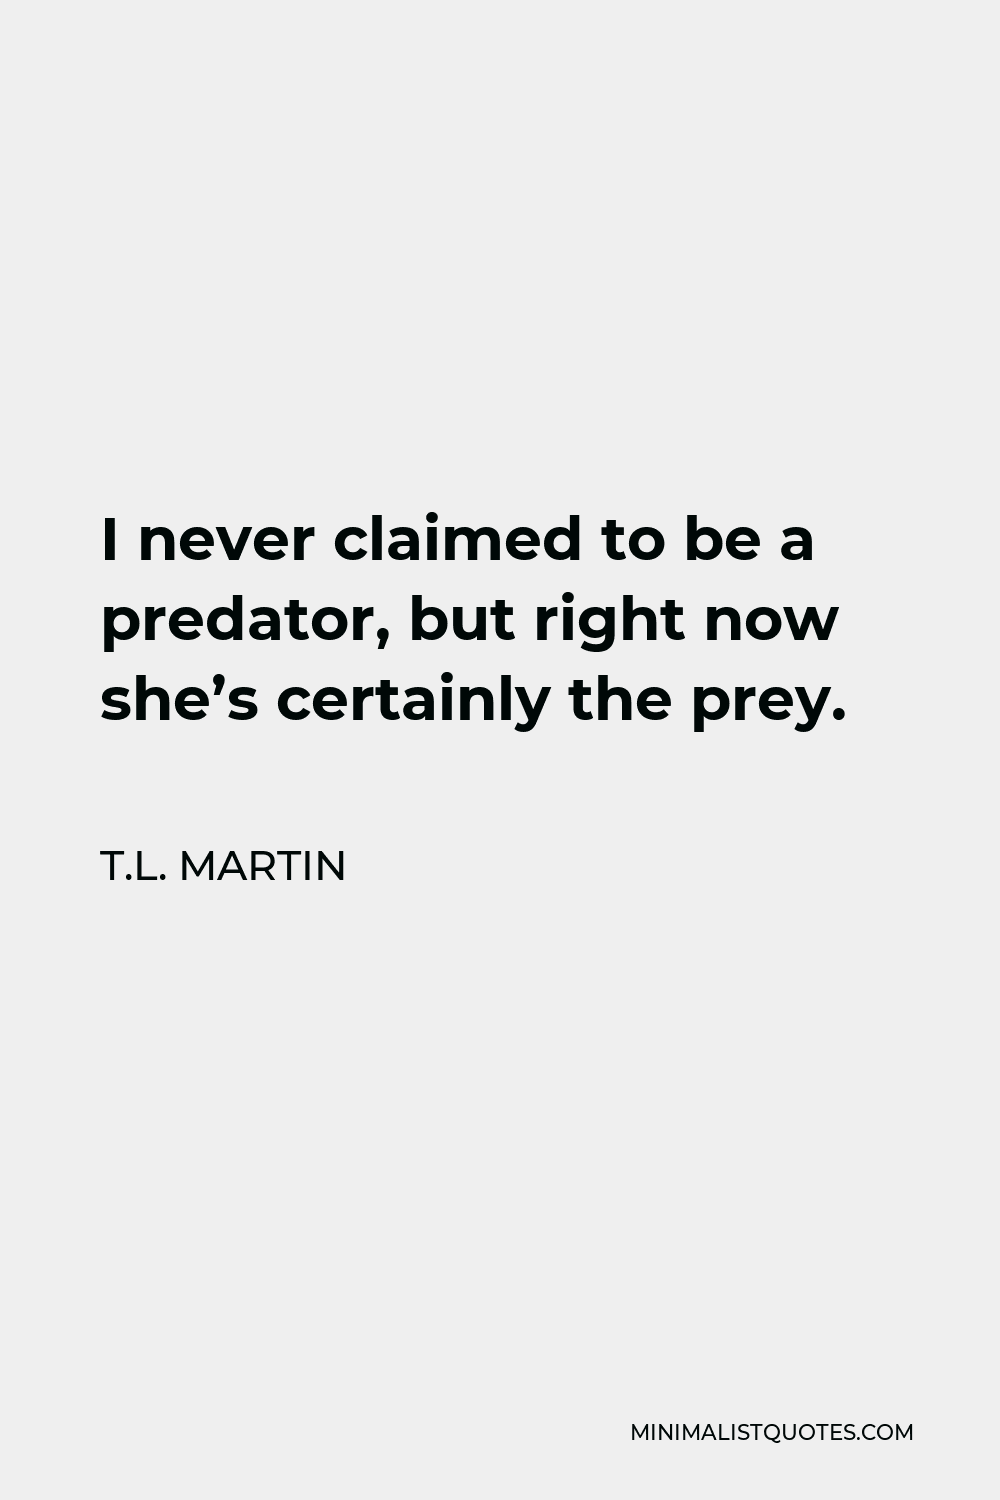 T.L. Martin Quote - I never claimed to be a predator, but right now she’s certainly the prey.